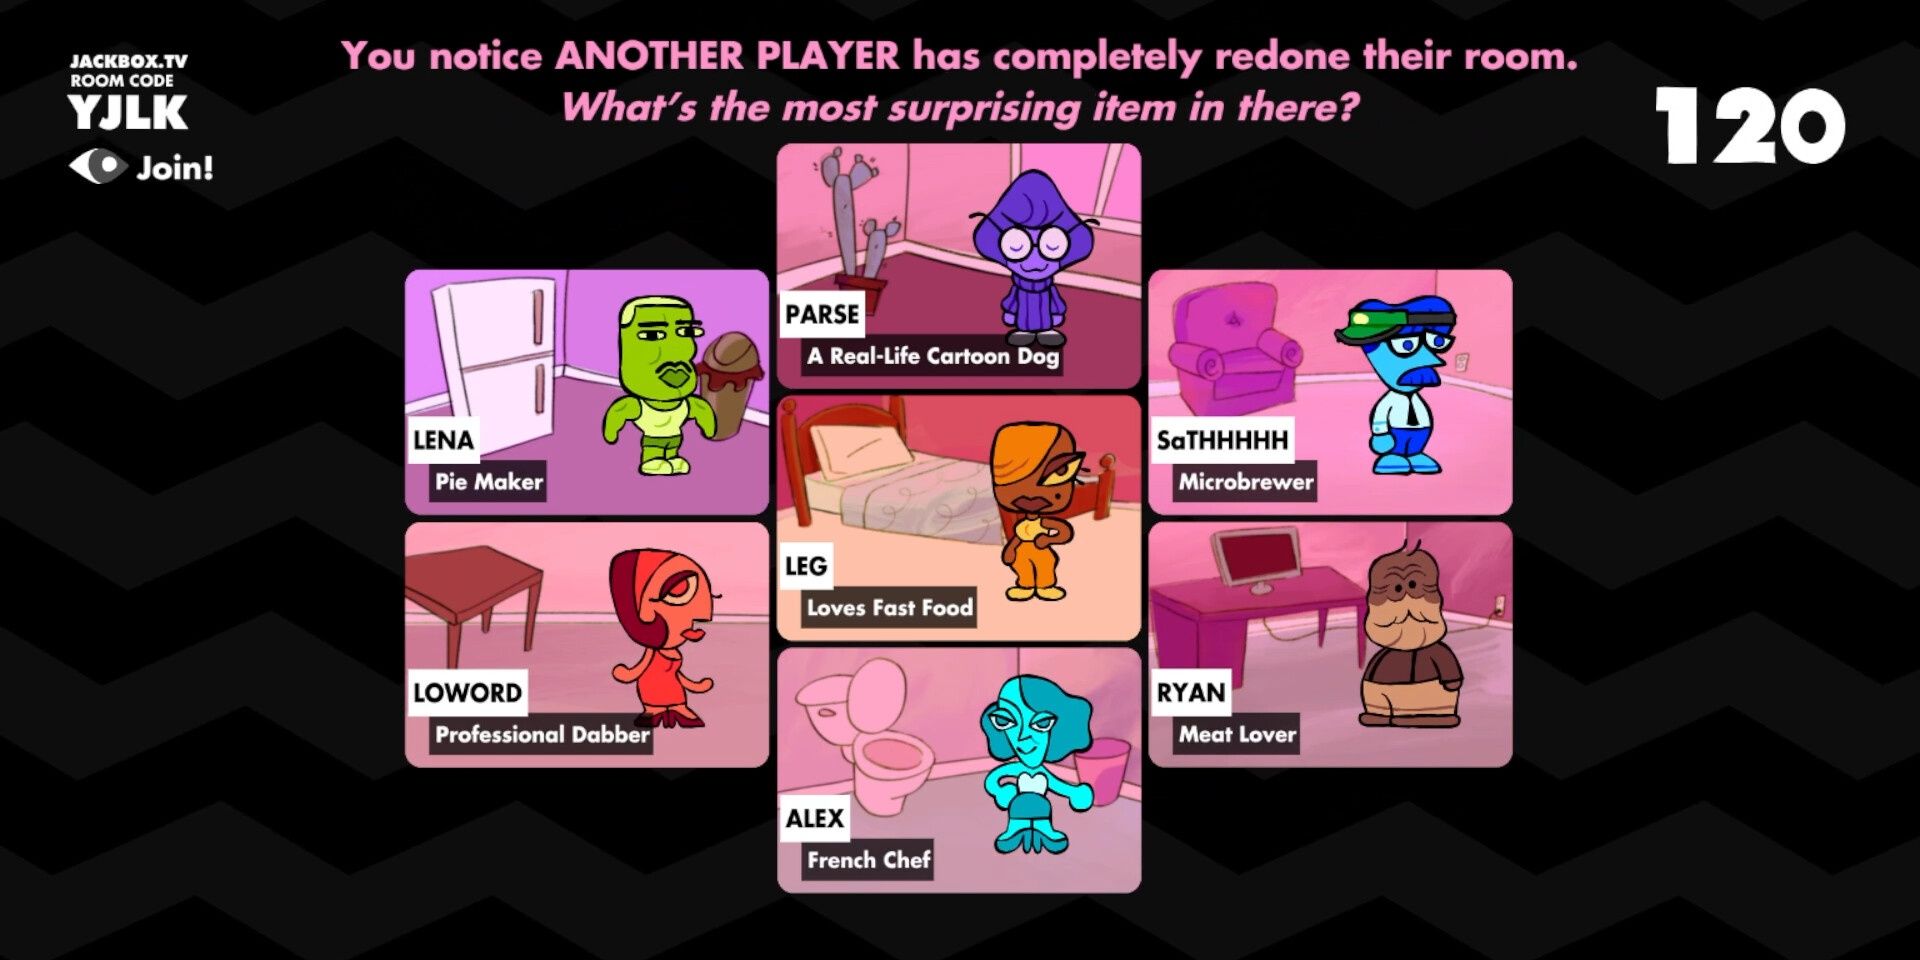 Different characters in Roomerang sitting in individual rooms answering to the prompt "You notice Another Player has completely redone their room. What's the most surprising item in there?"